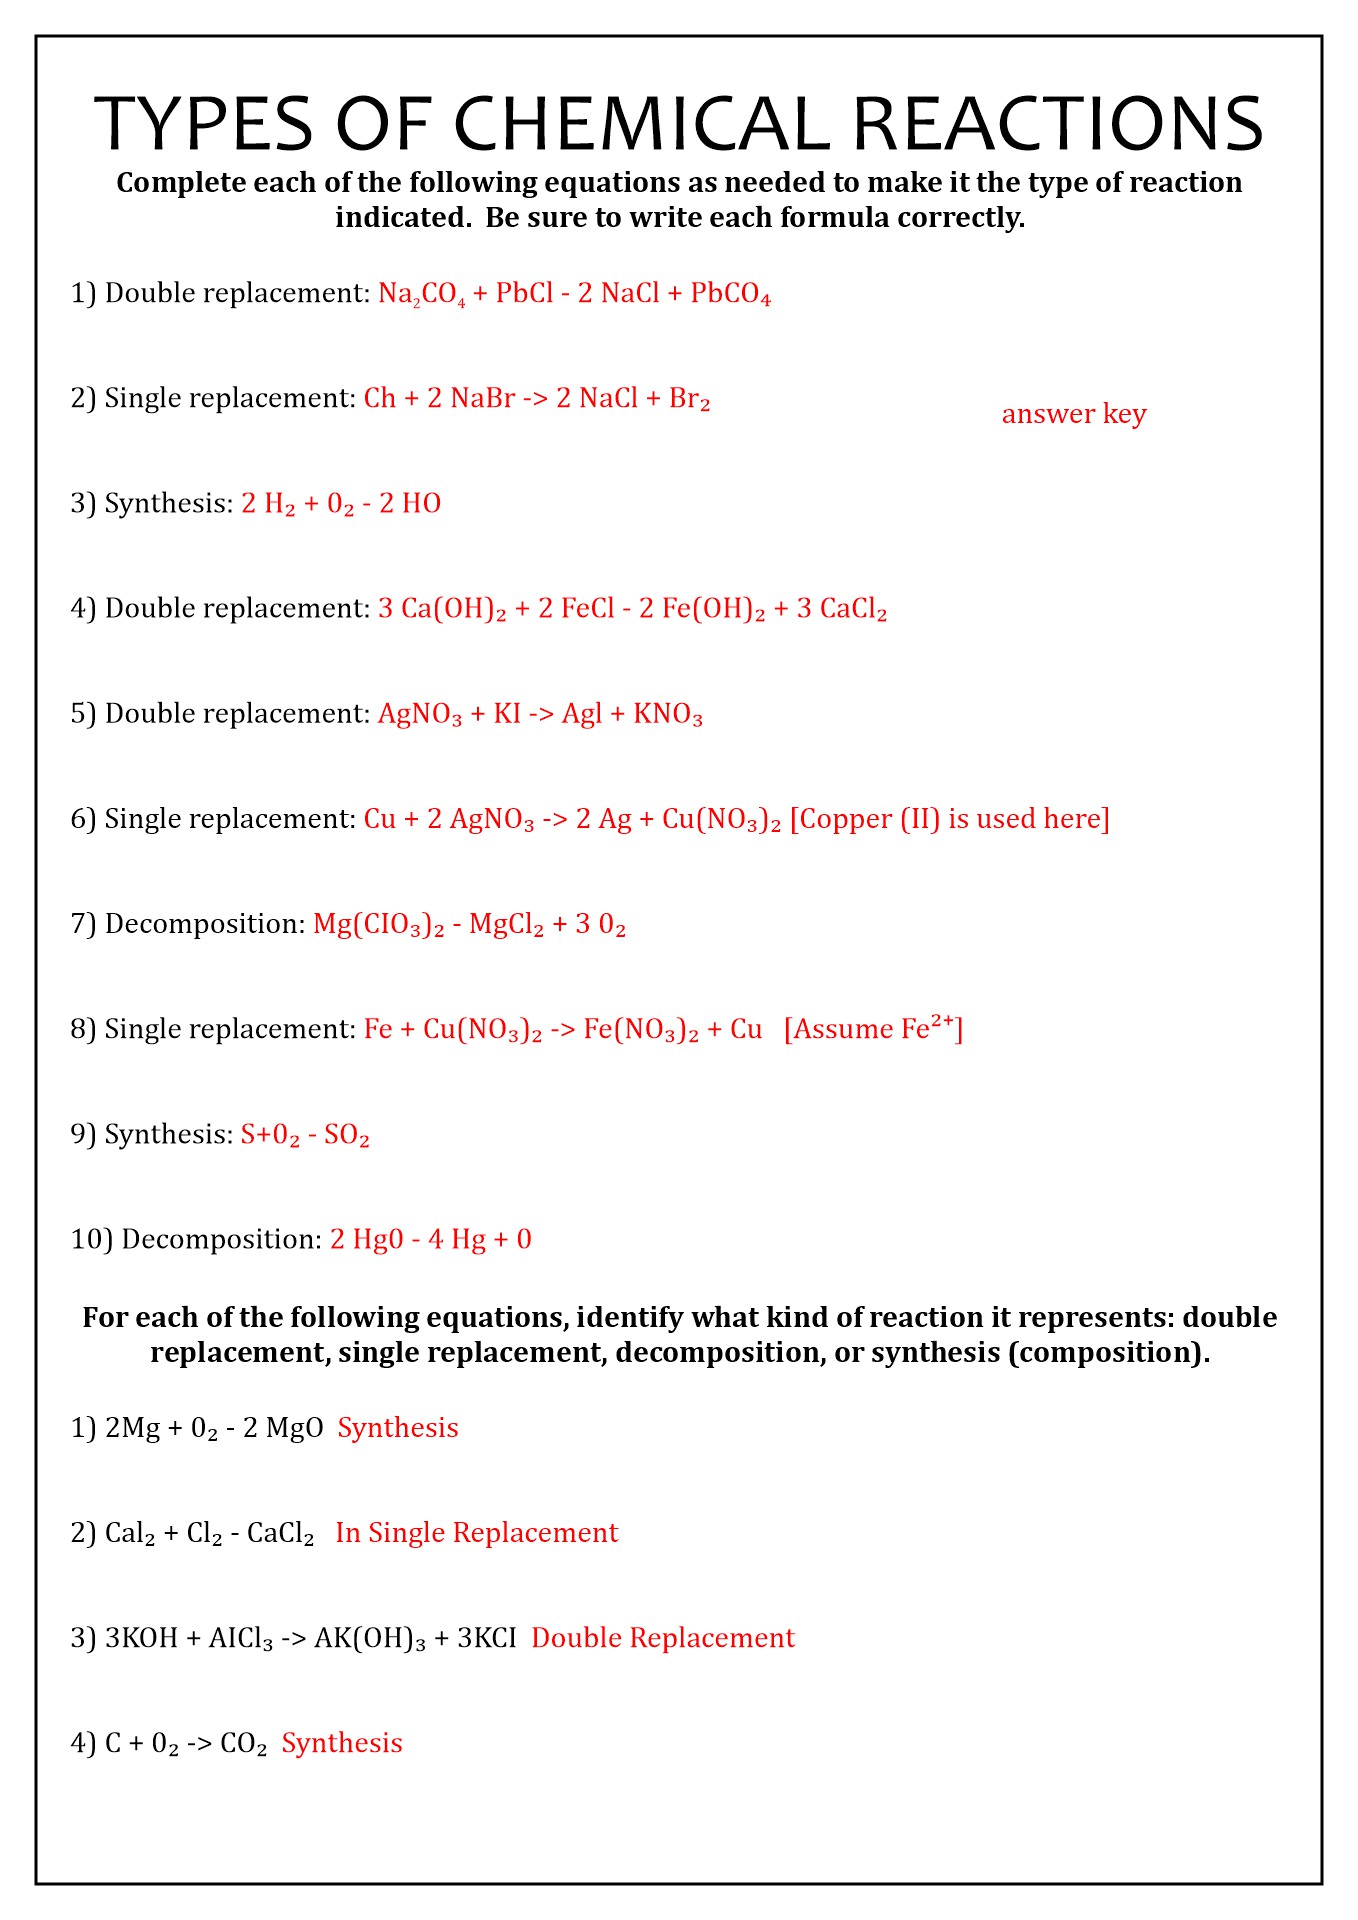 classifying-chemical-reactions-worksheet-answers-pdf